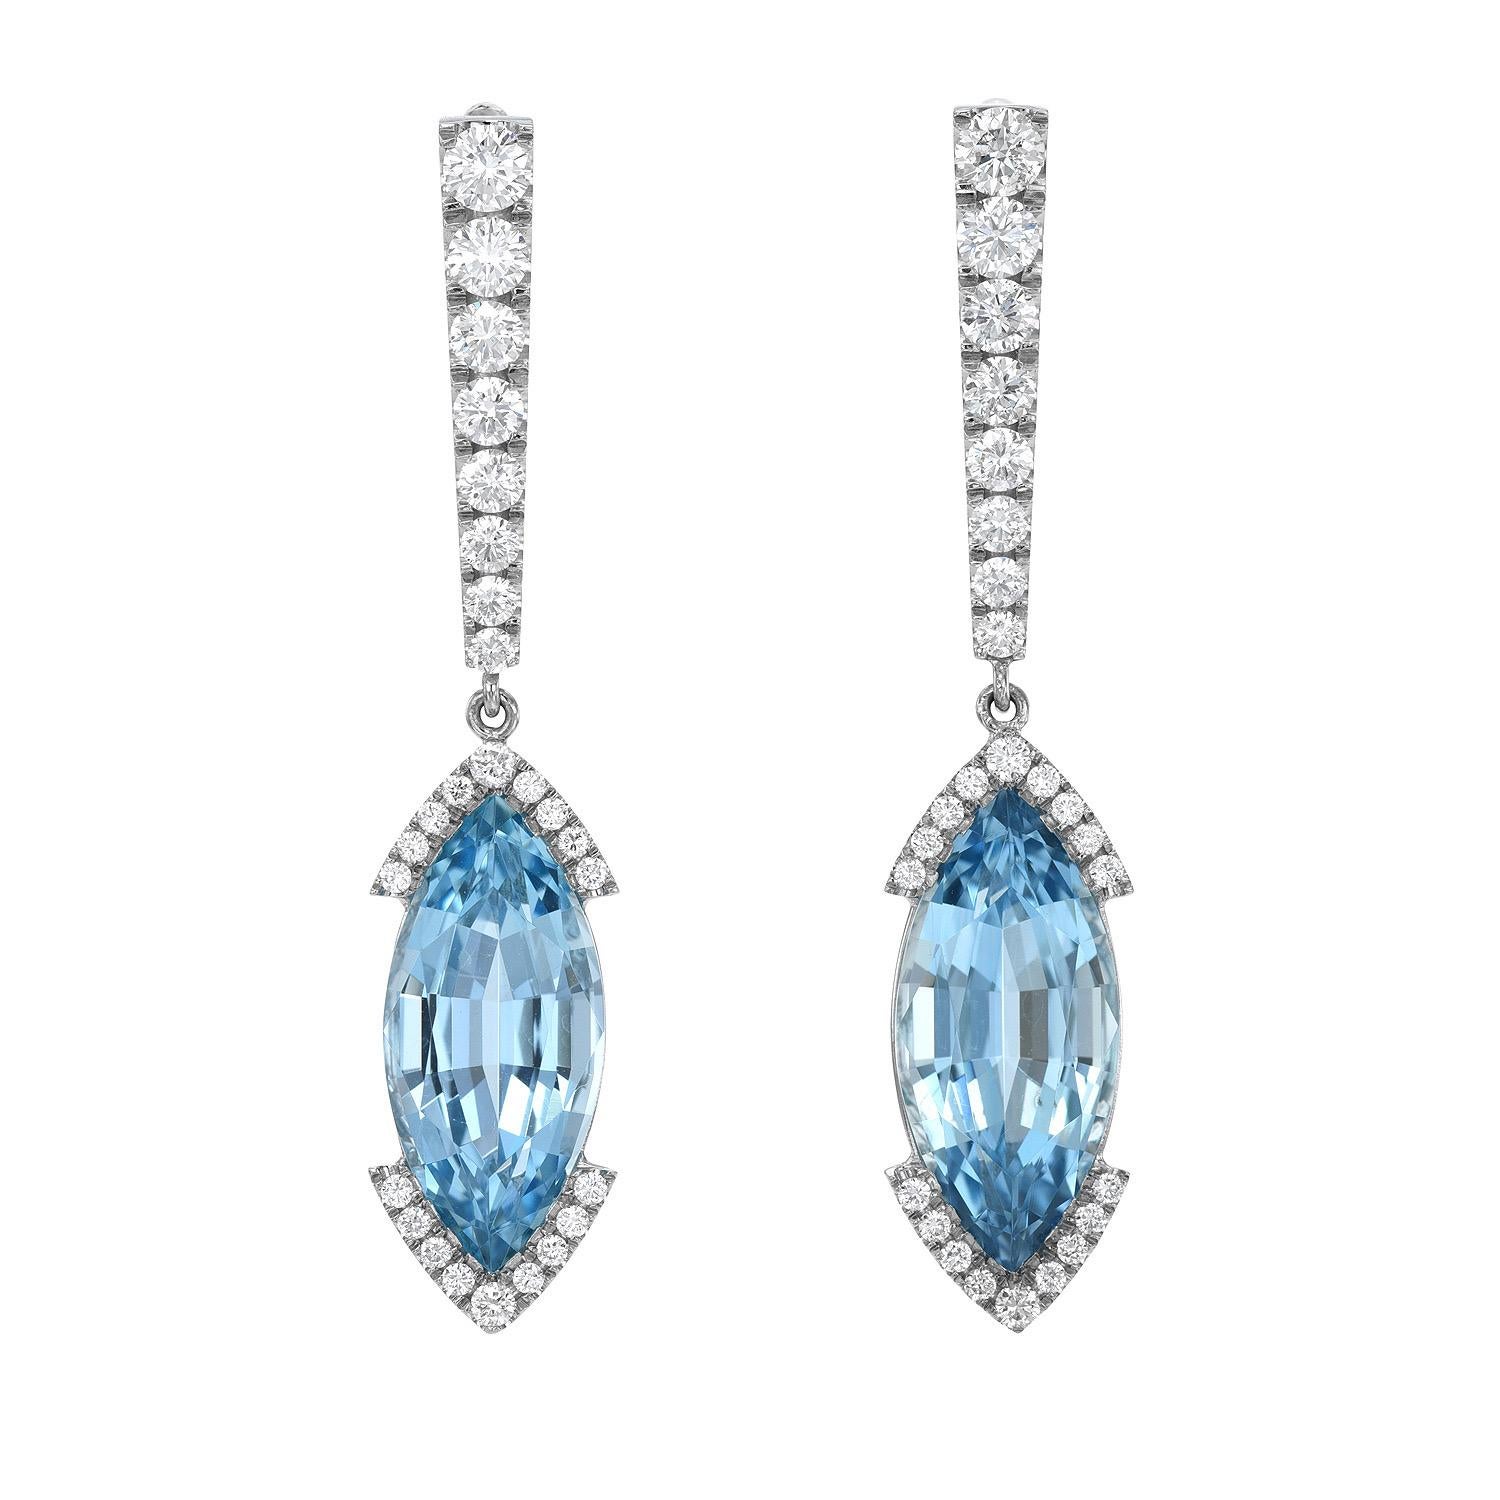 Contemporary Aquamarine Earrings 7.75 Carat Marquise For Sale